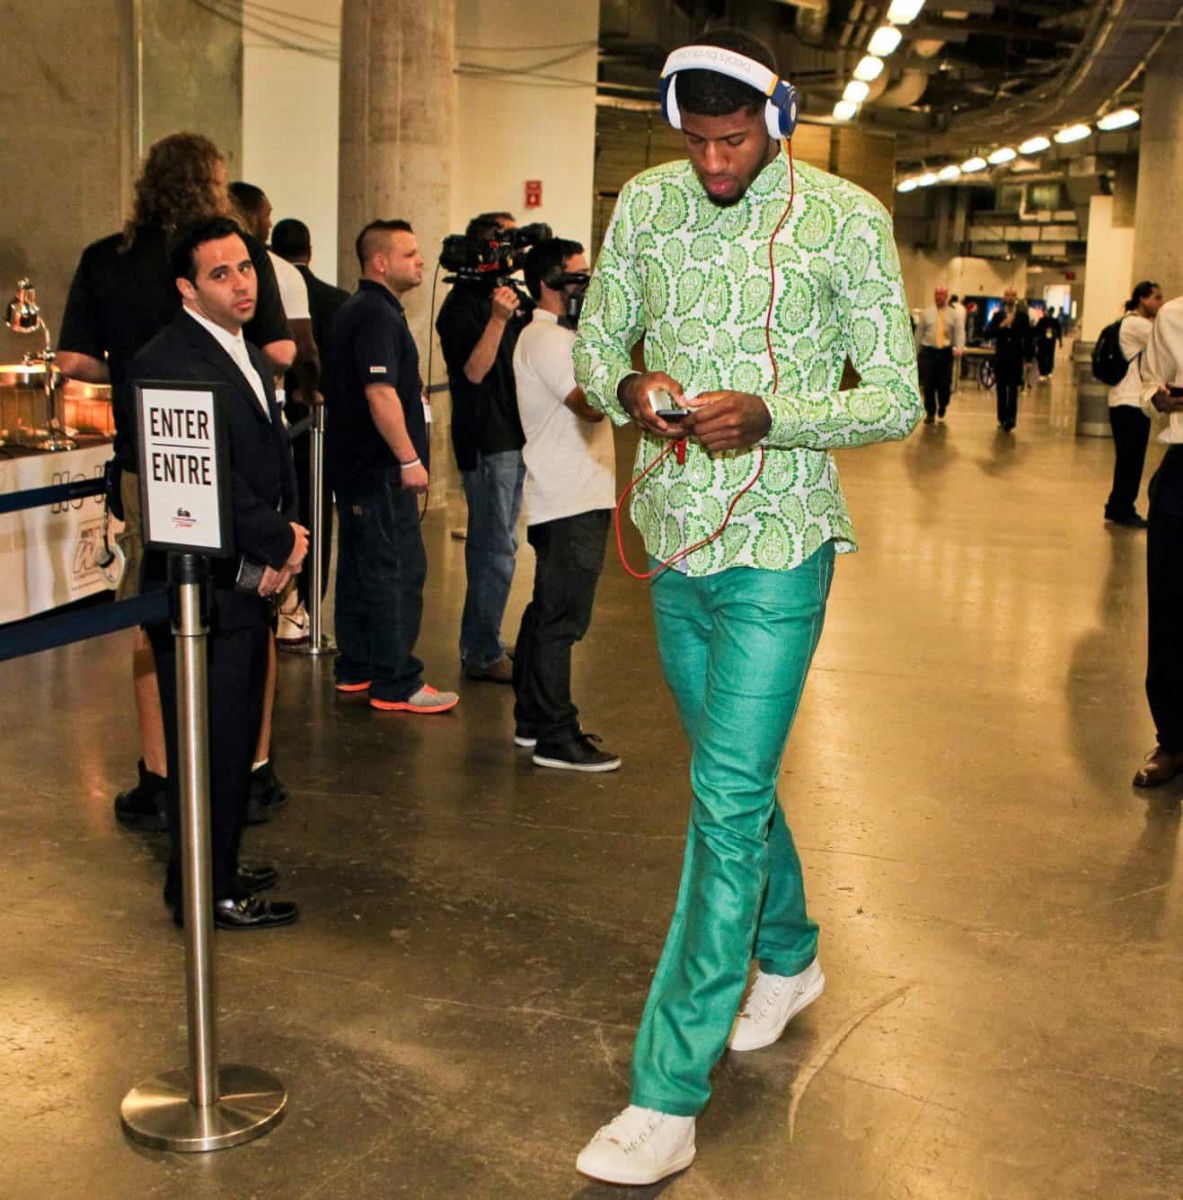 NBA Players' WORST Pre-Game Outfits 🙅🏽‍♂️, Russell Westbrook is just  really weird about his fashion but LeBron James in that shorts is fire  though 🔥, By NBA TikTok